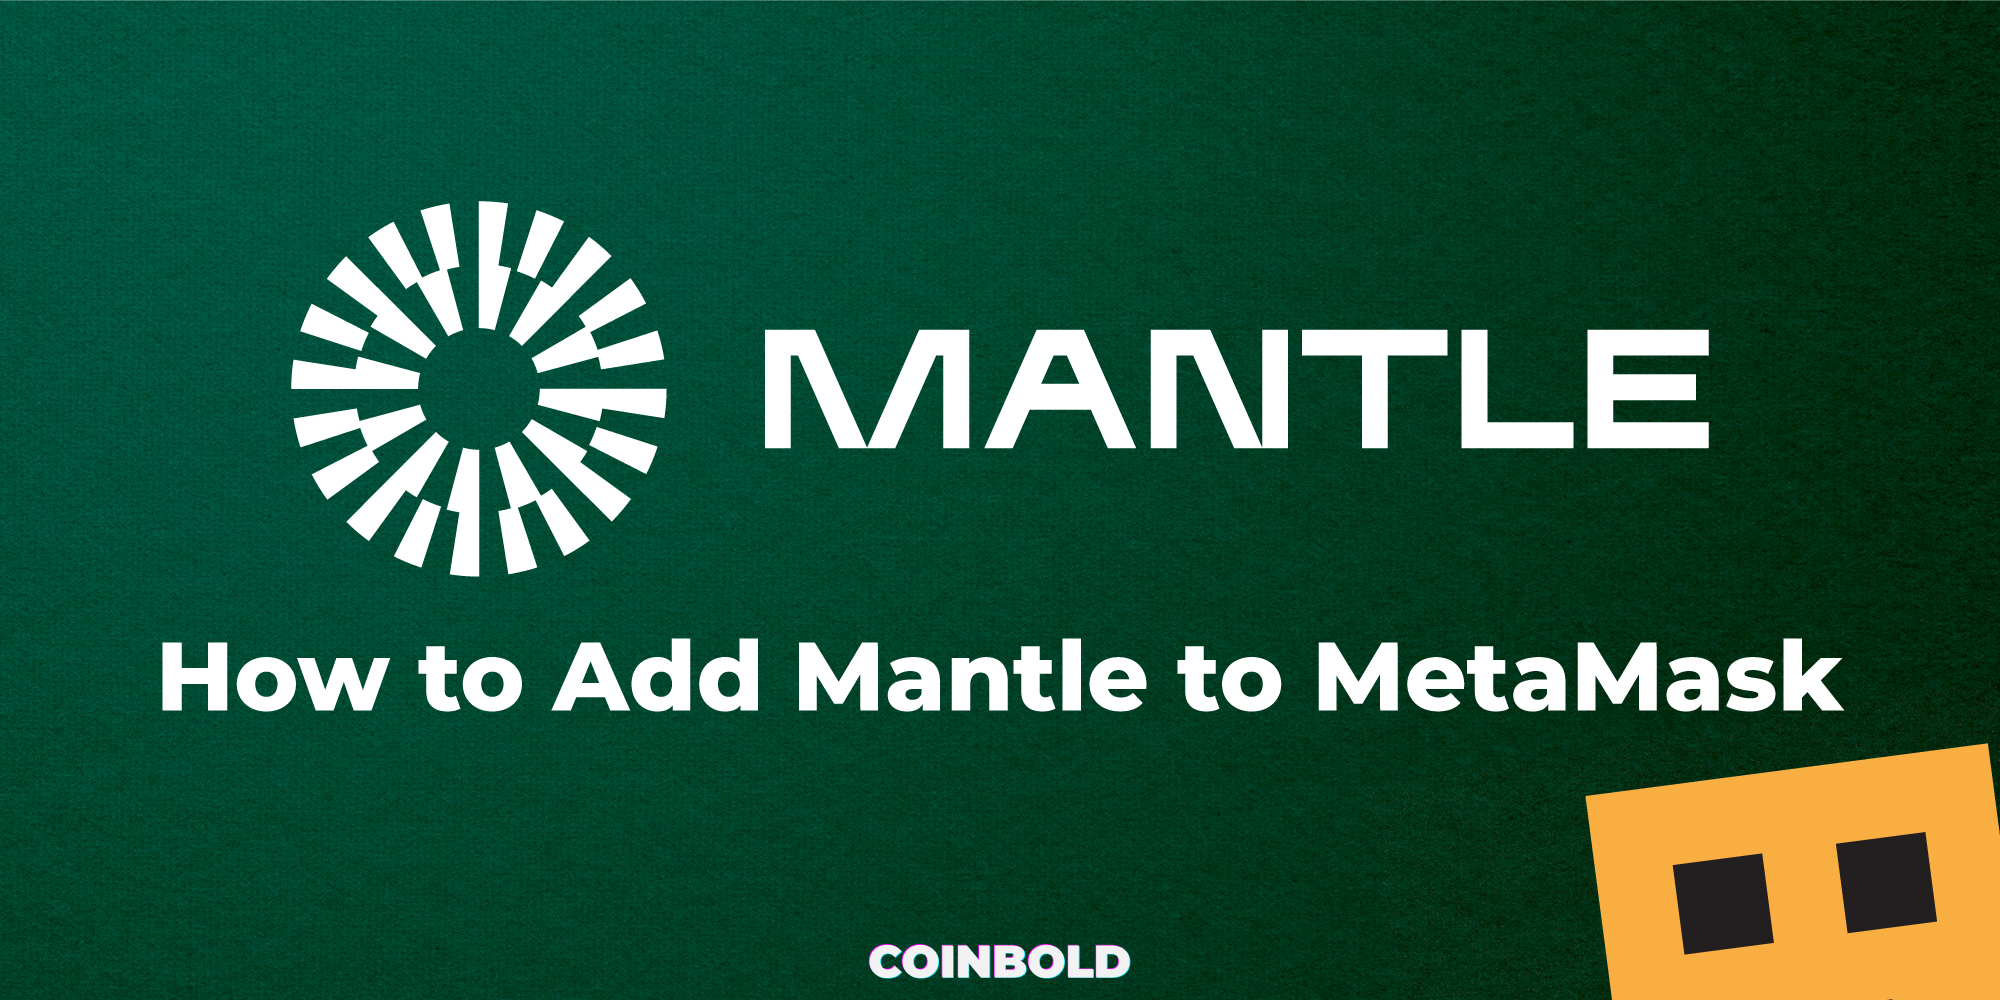 How to Add Mantle to MetaMask